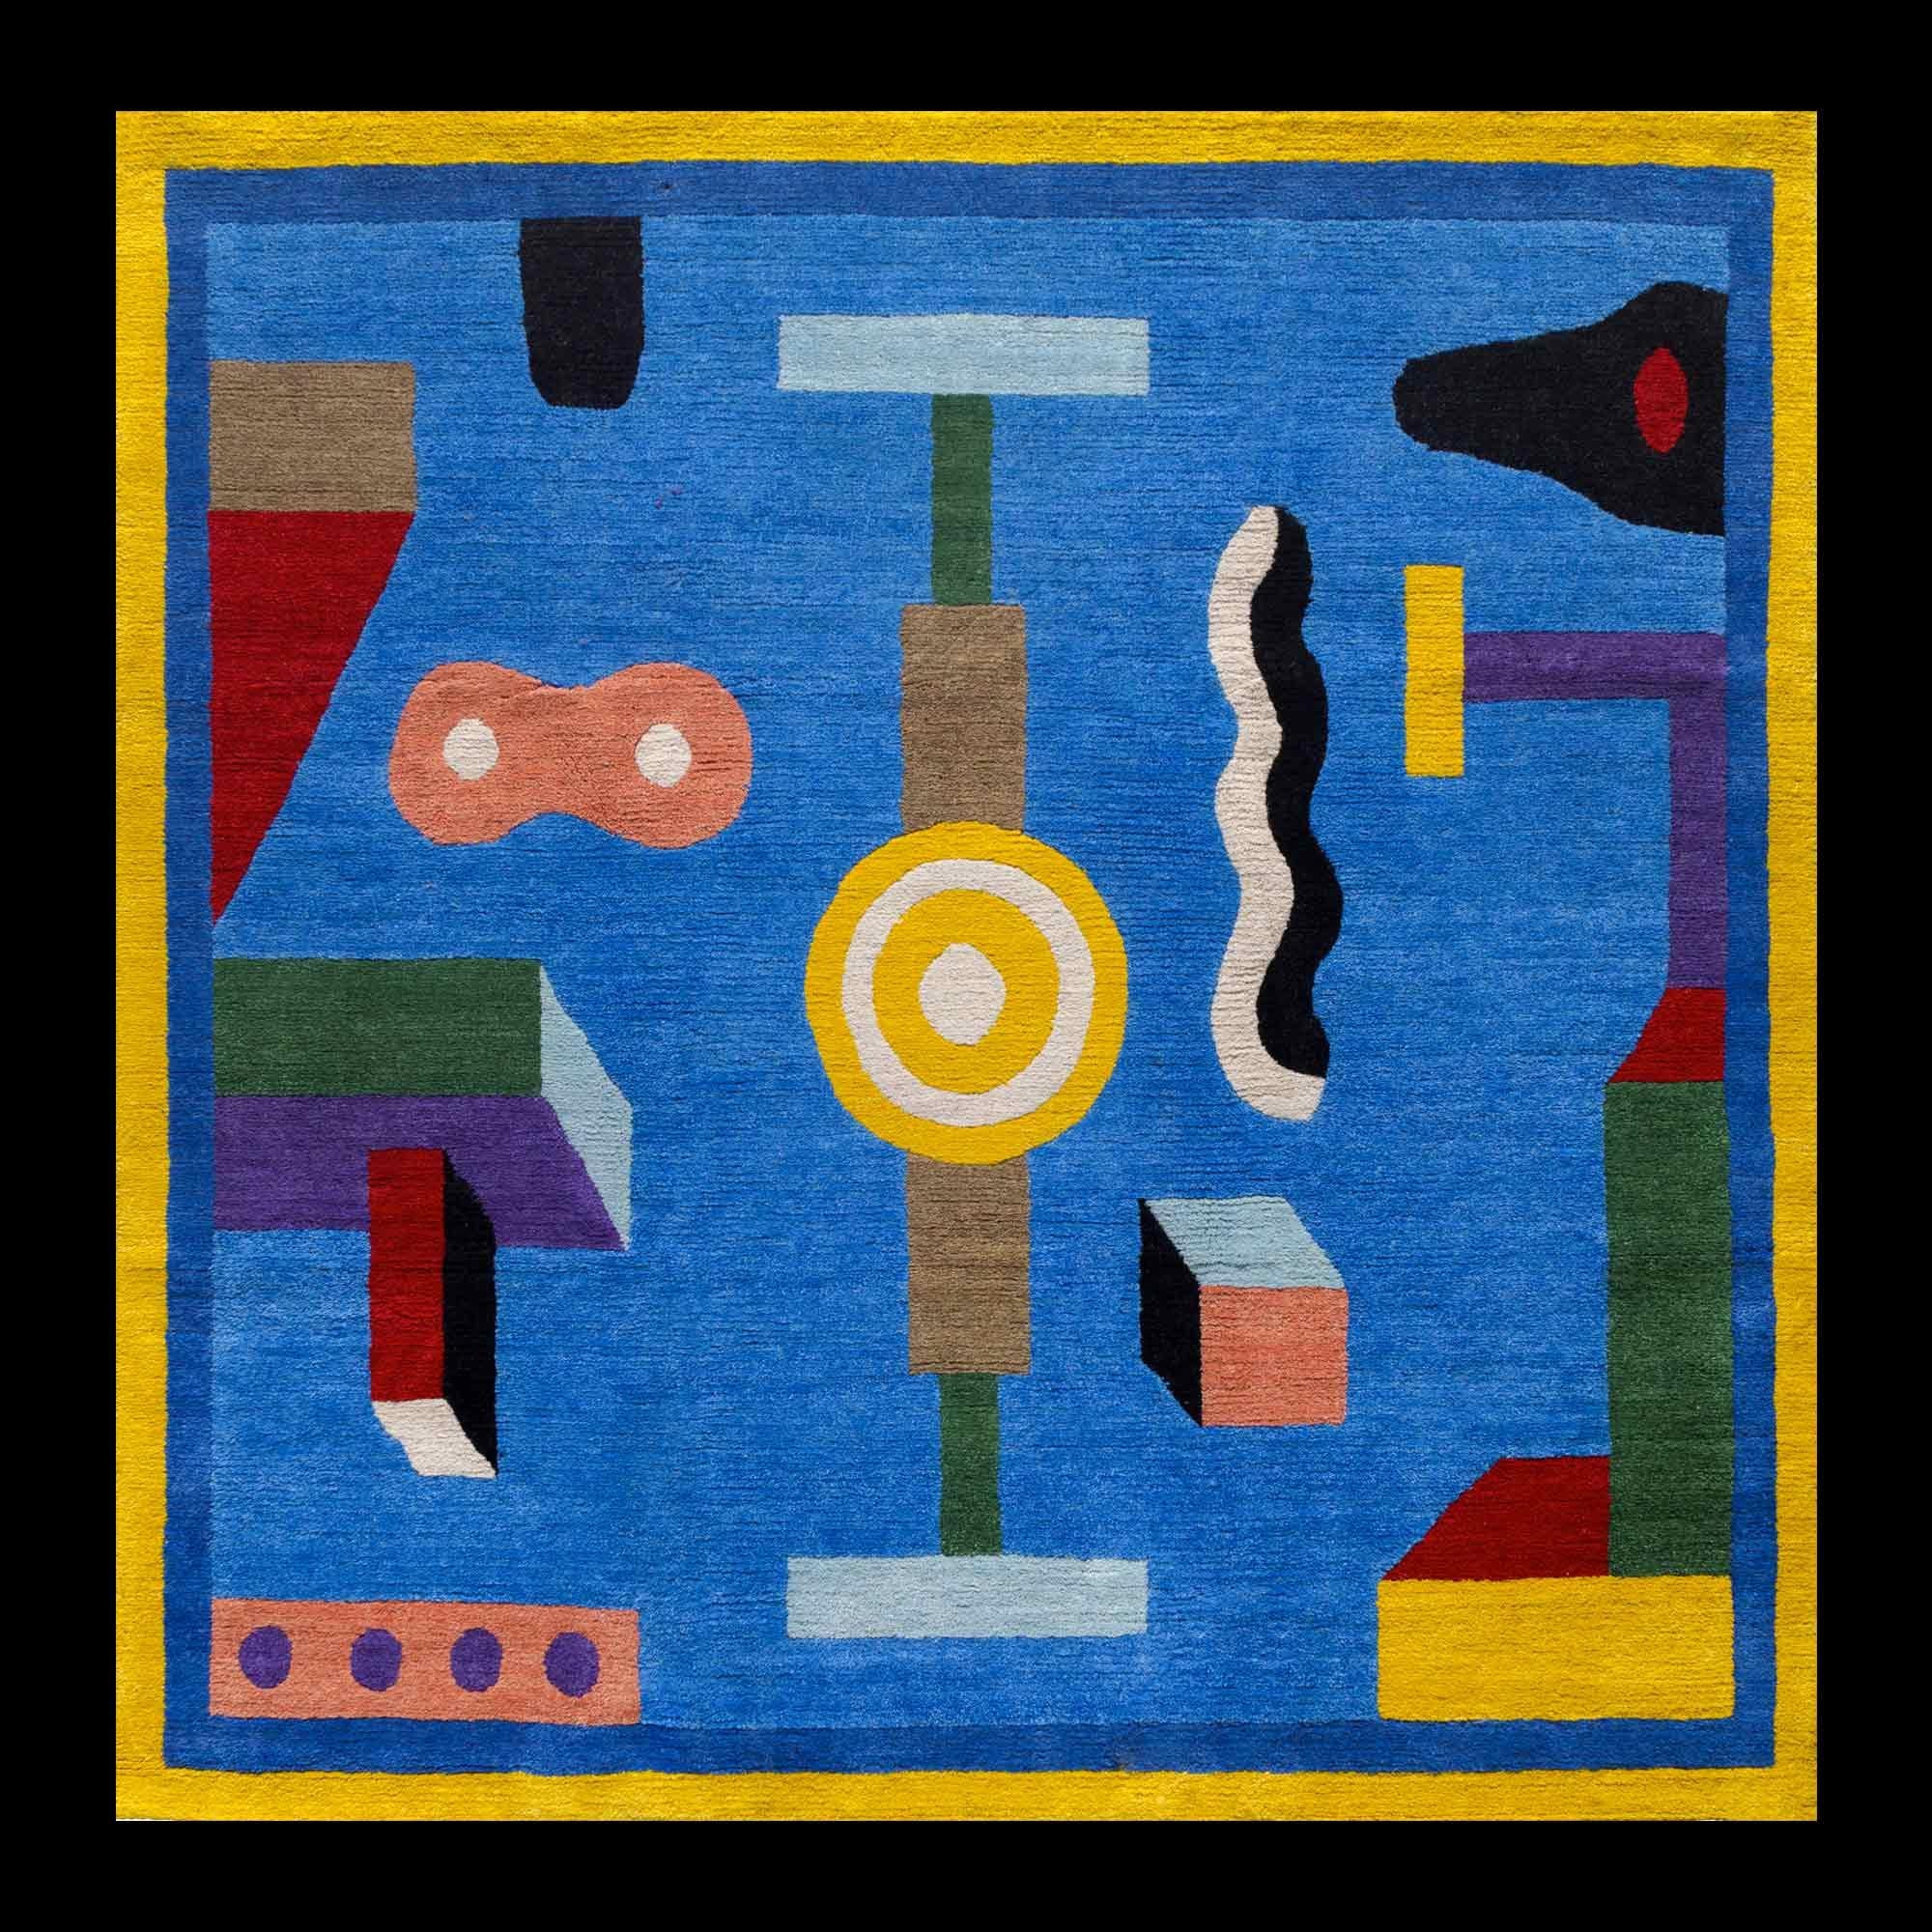 NDP45 woollen carpet by Nathalie Du Pasquier for Post Design collection/Memphis

A woollen carpet handcrafted by different Nepalese artisans. Made in a limited edition of 36 signed, numbered examples.

As the carpet is made by hand, there are